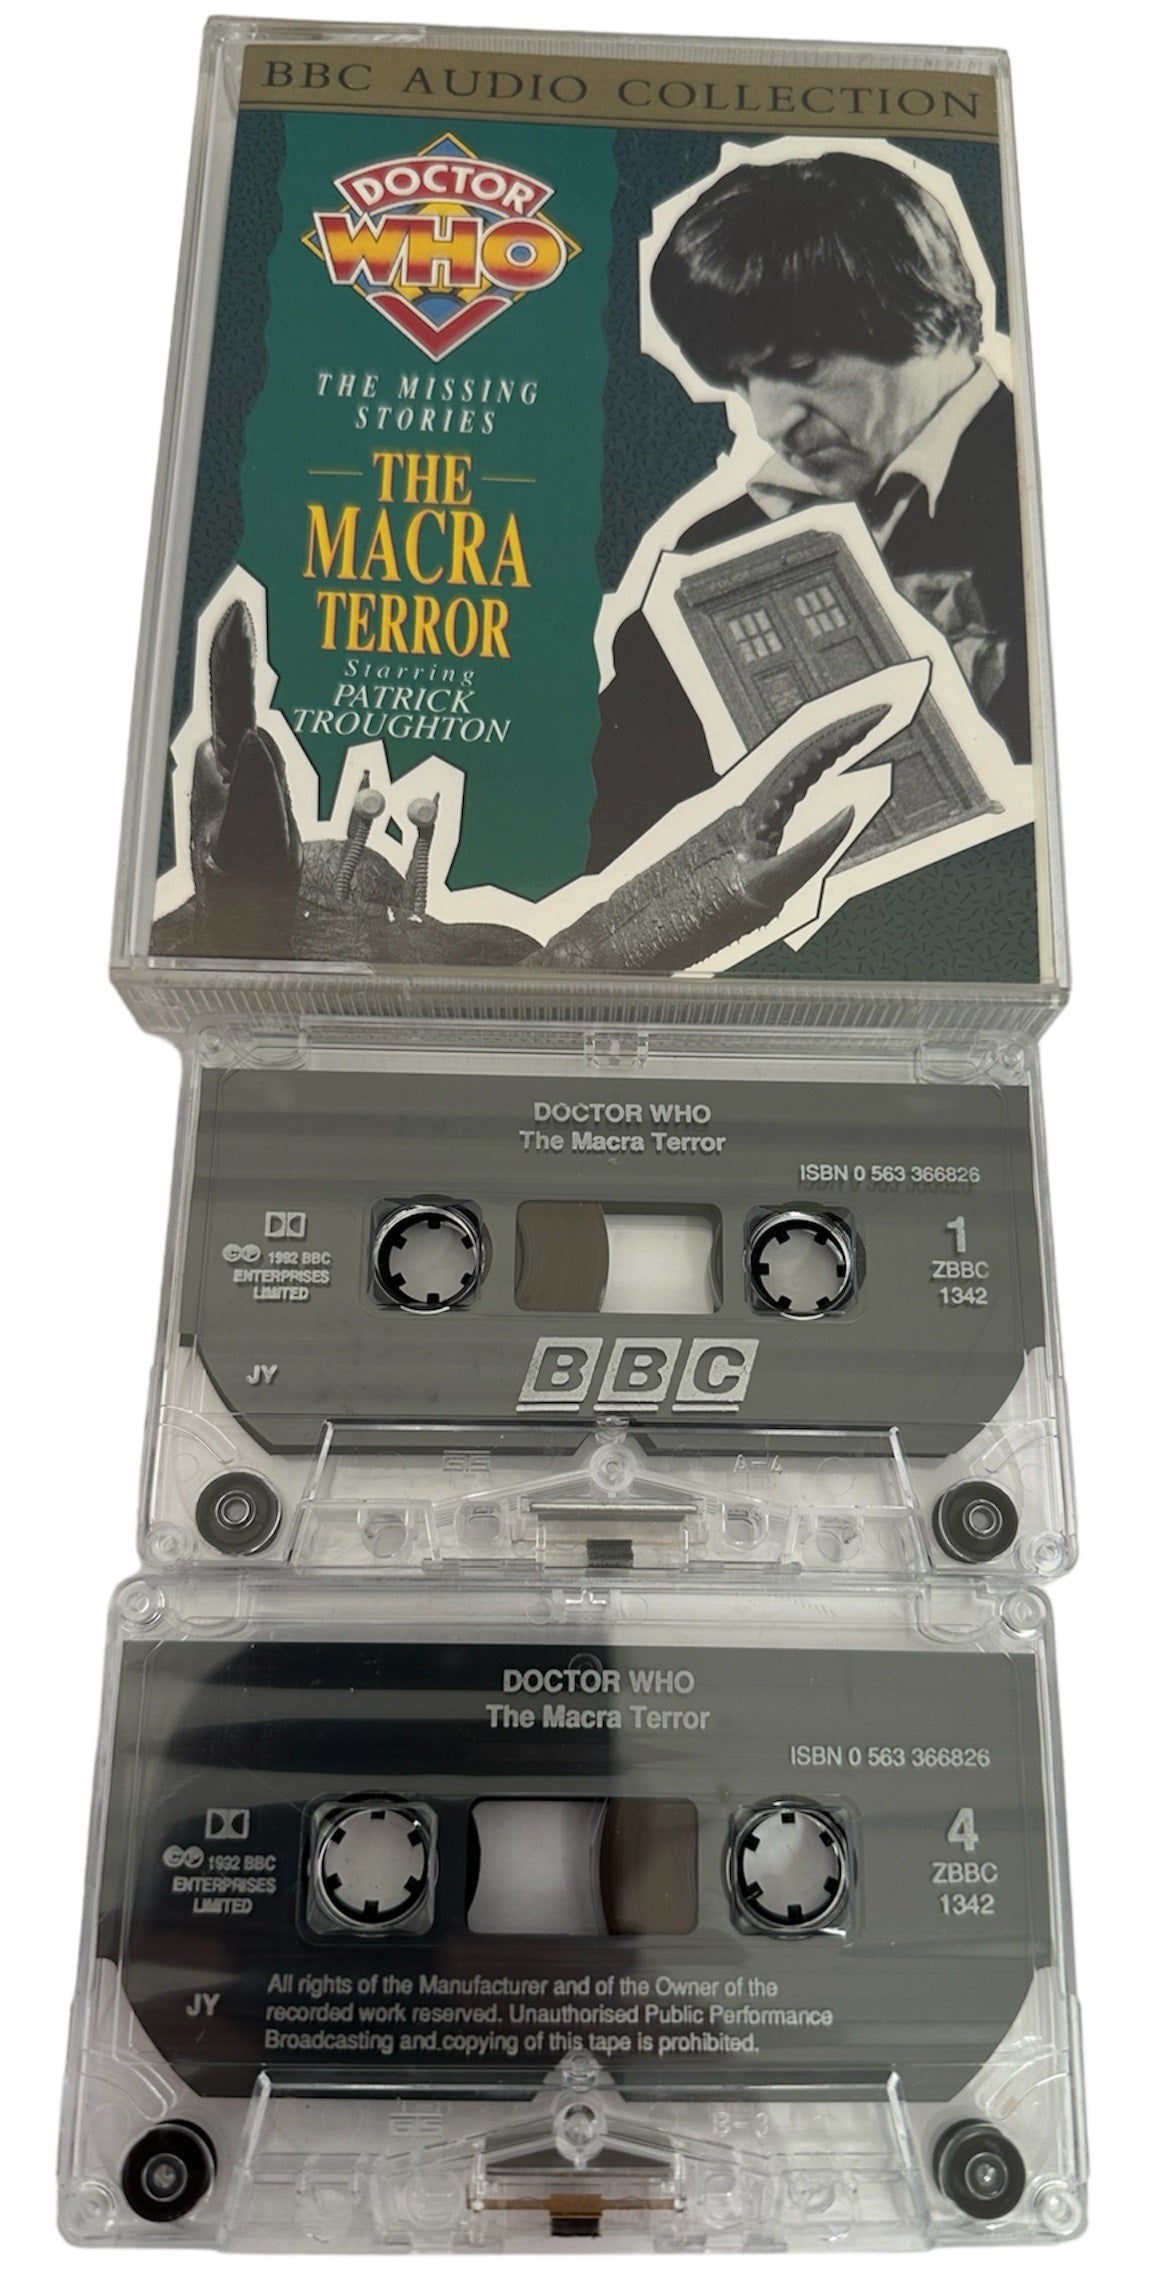 Vintage 1992 BBCs Radio Collection - Doctor Dr Who - The Missing Stories - The Macra Terror Starring Patrick Troughton - Double Audio Cassette Set - Shop Stock Room Find